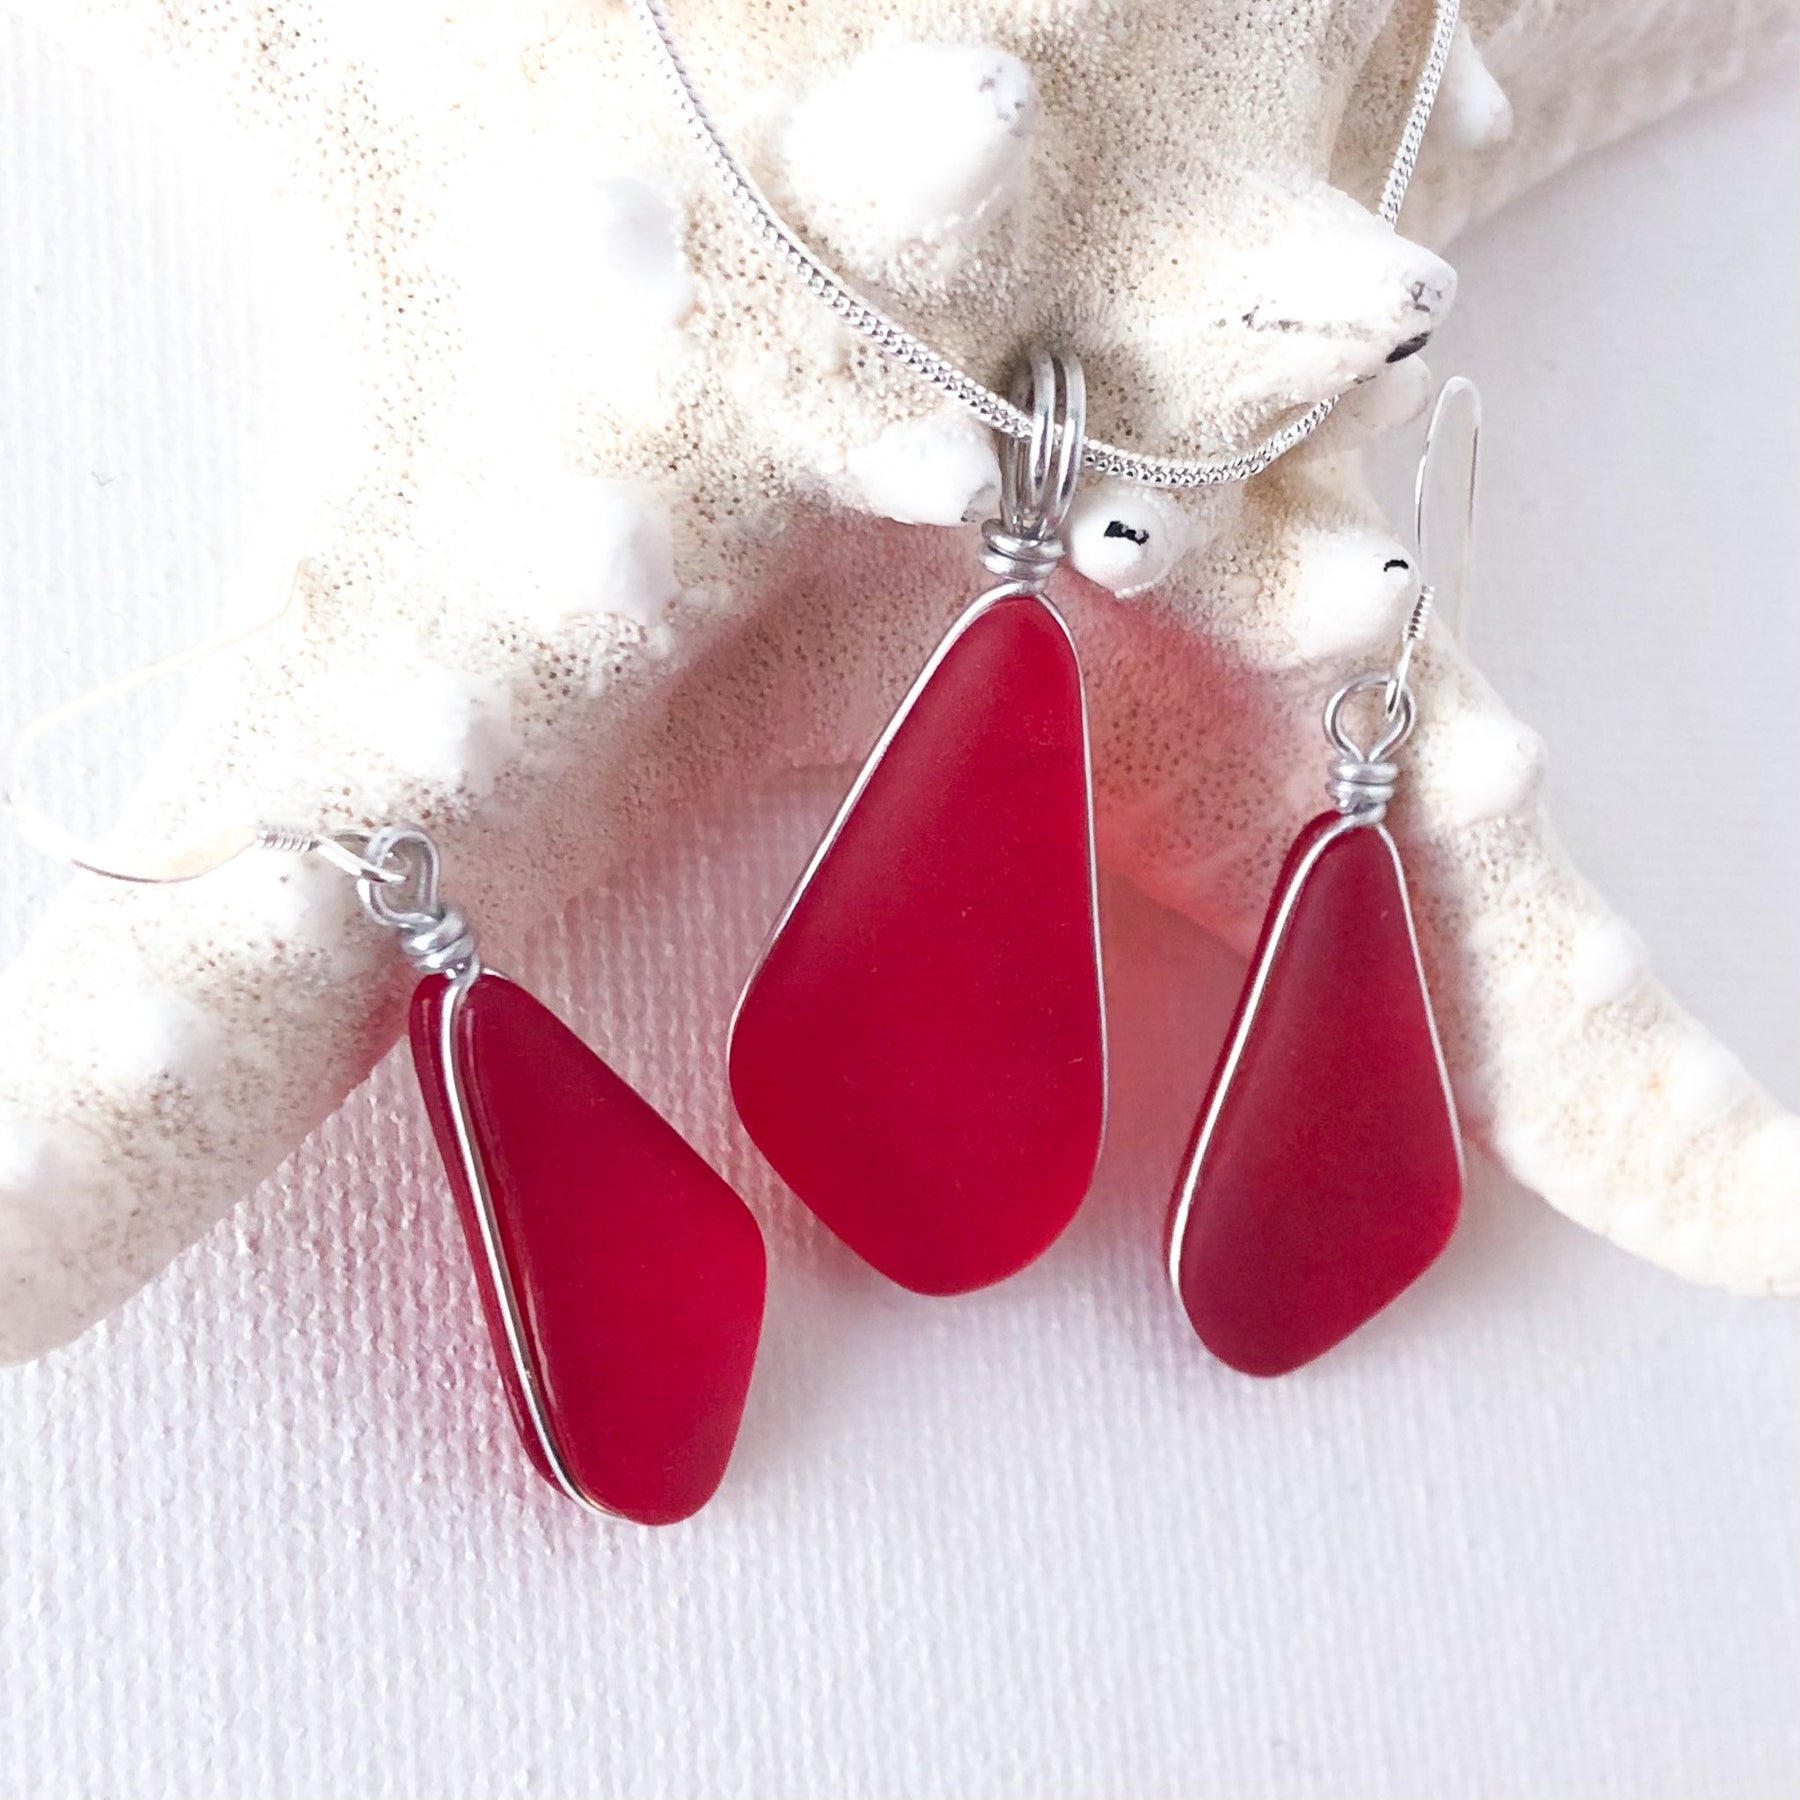 PASSION Red Trapezoid Sea Glass Earrings